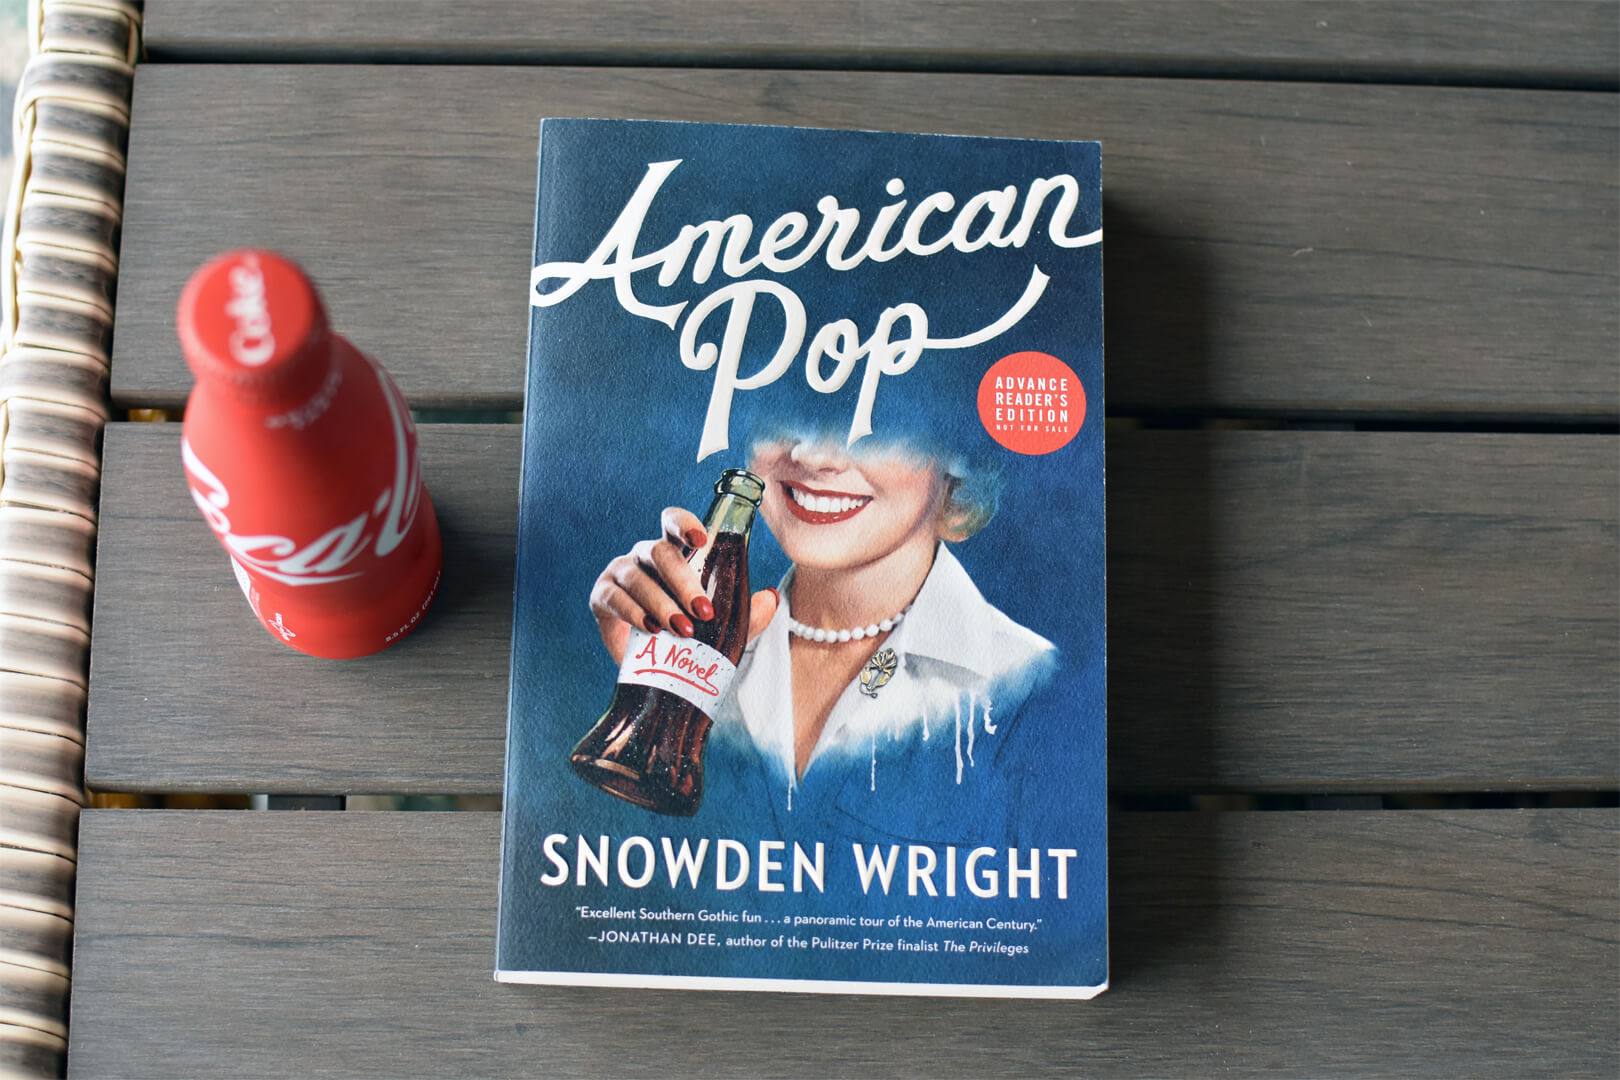 Book Club Questions for American Pop by Snowden Wright